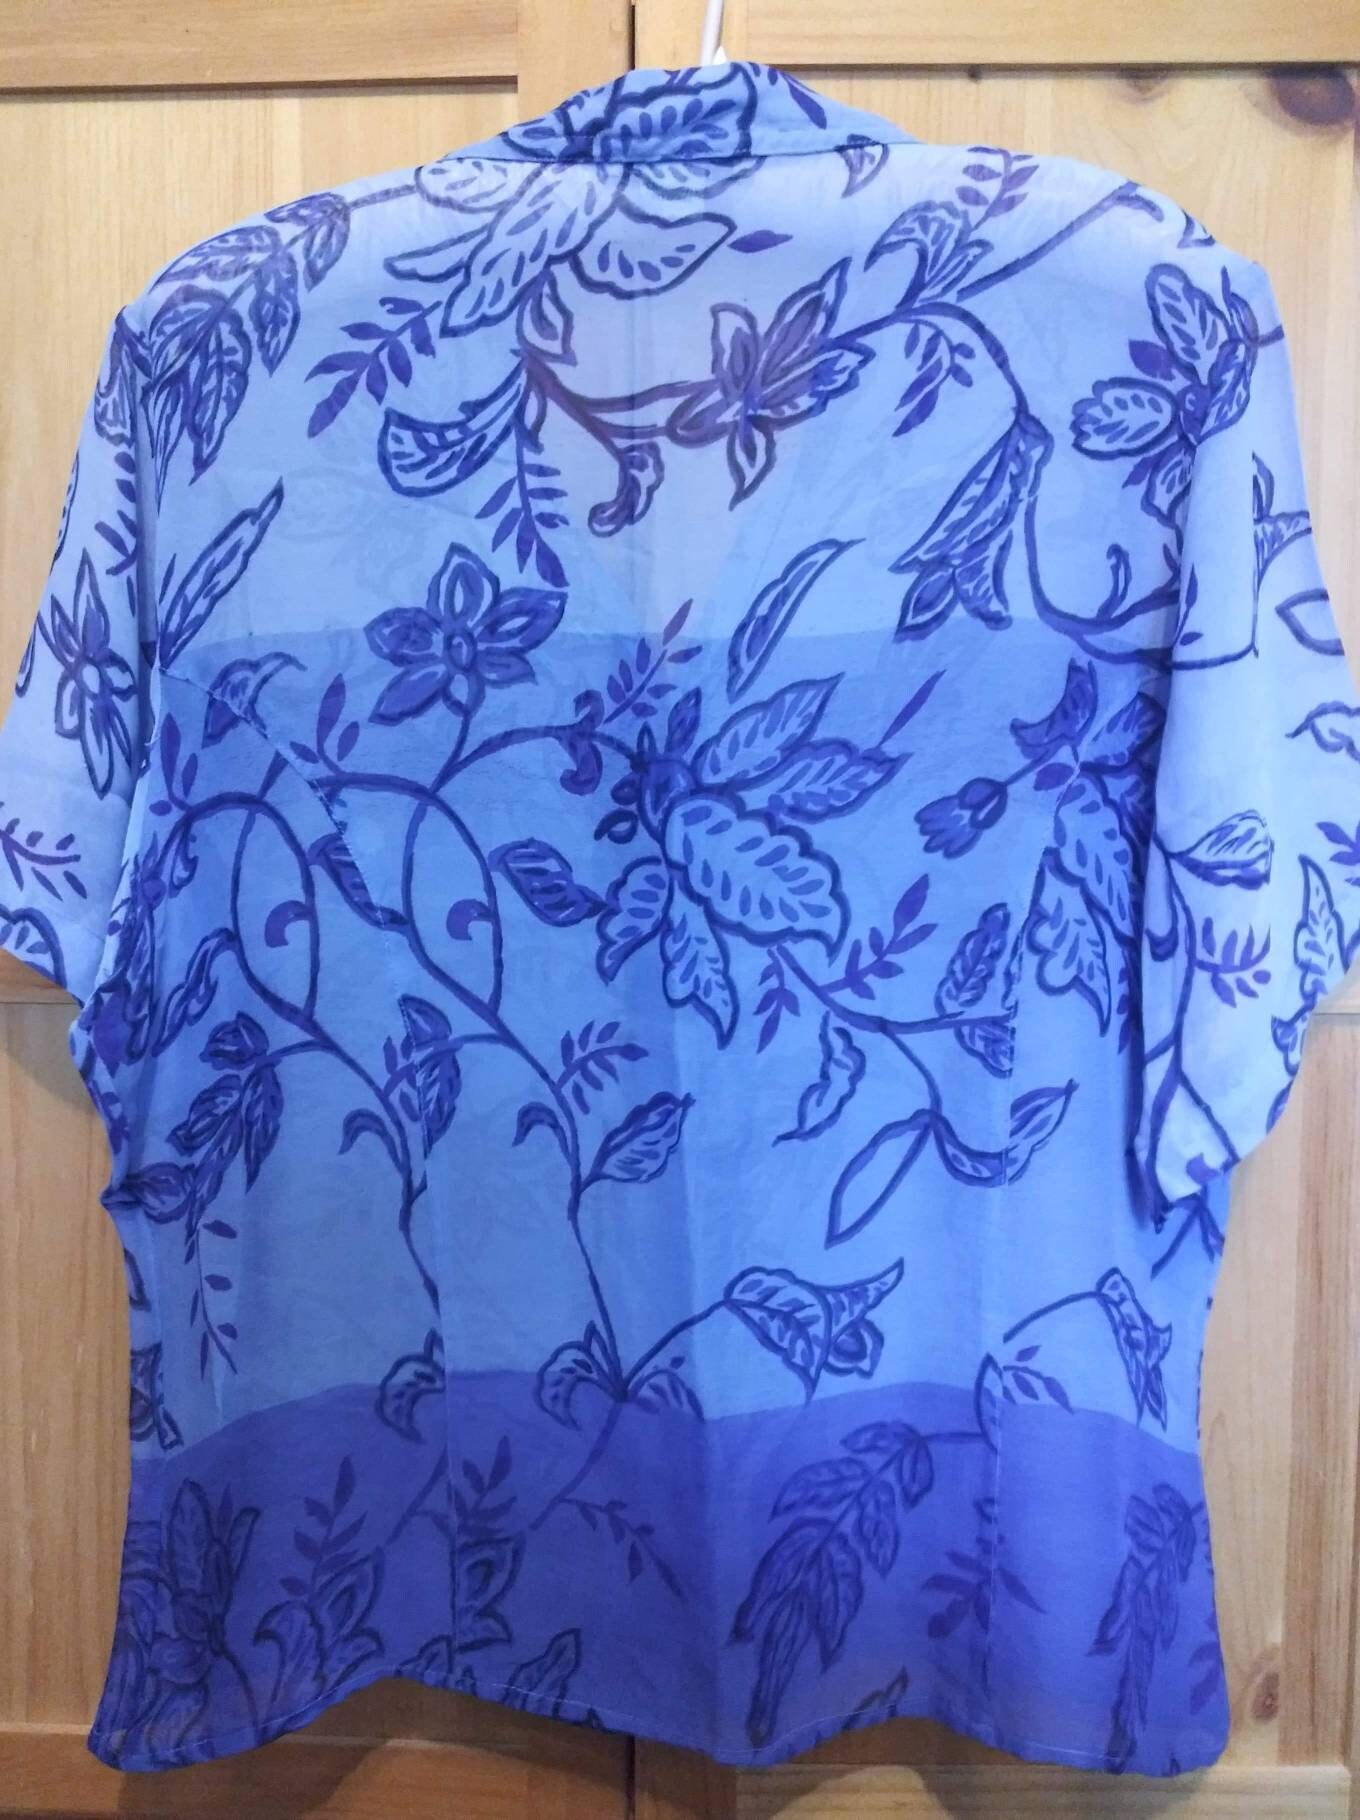 Vintage blouse 90s four shades of sheer blue.